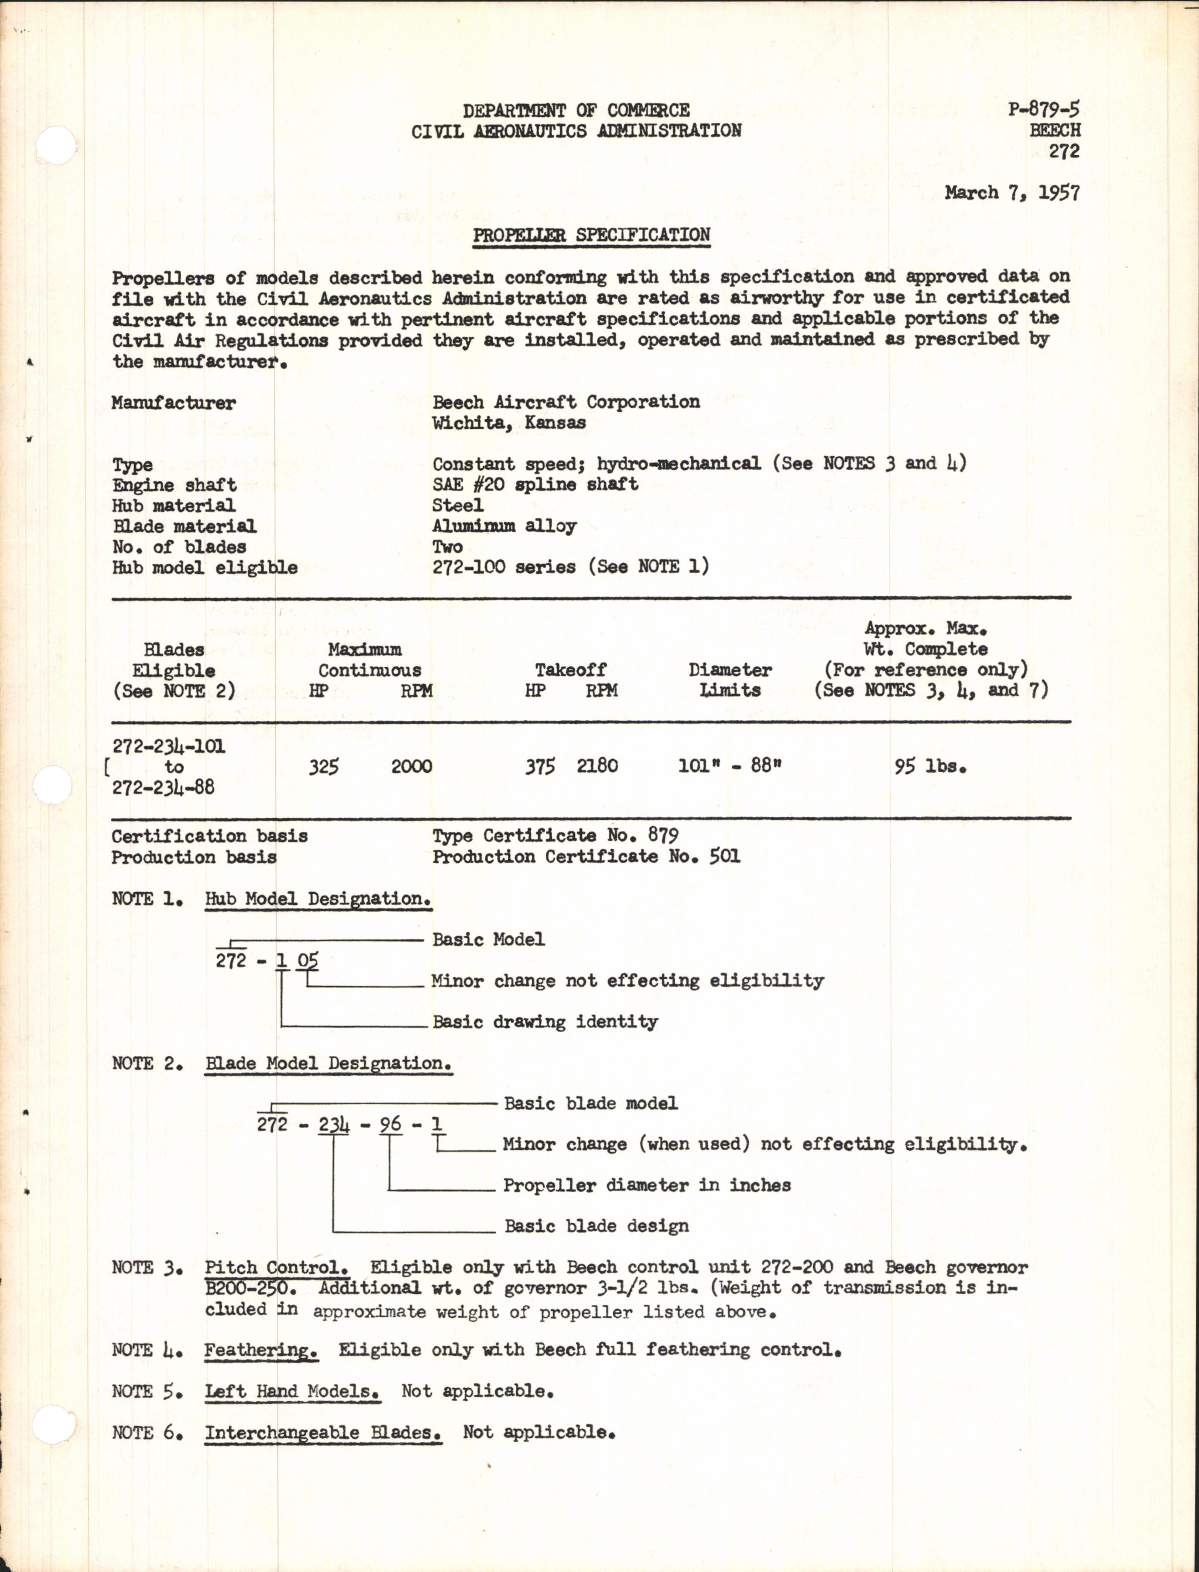 Sample page 1 from AirCorps Library document: 272